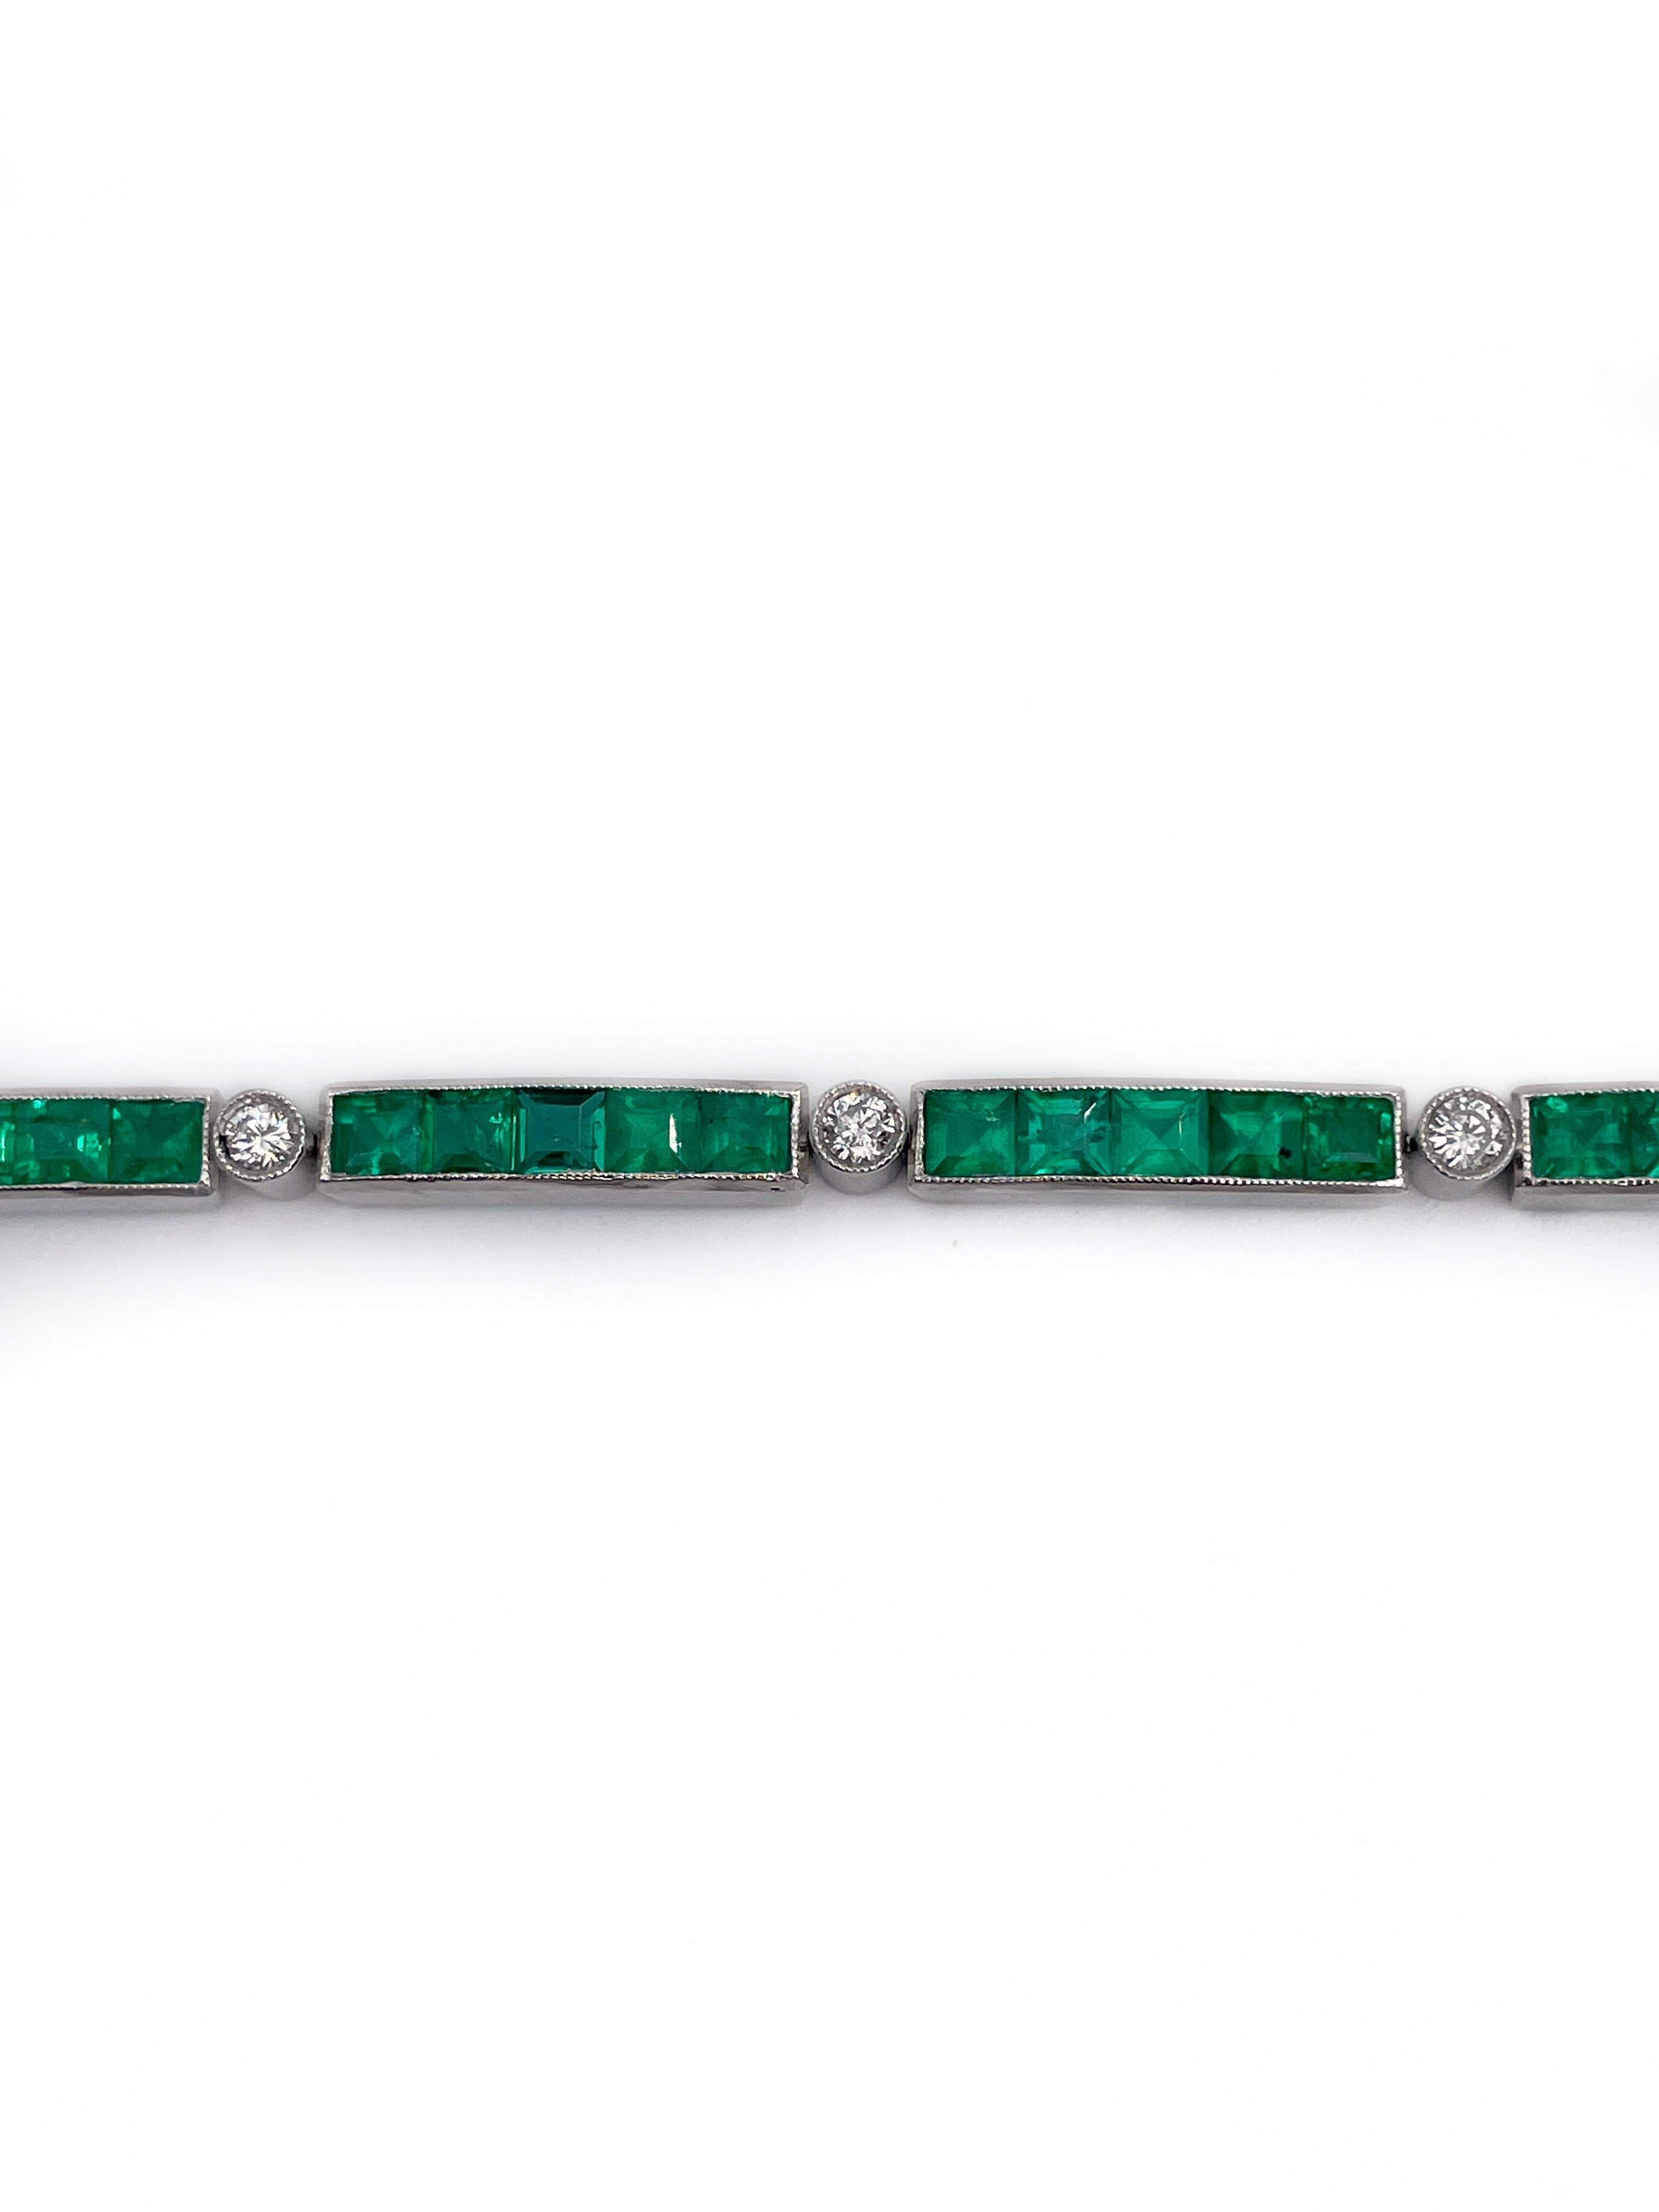 This is a gorgeous Art Deco style tennis bracelet crafted in 14K white gold and 850 hallmark platinum. It features 45 baguette cut emeralds and 9 round old cut diamonds. 

Emeralds: 5.40ct, very strongly bluish green (vstgB 3/5), SI-I2, F
Diamonds: